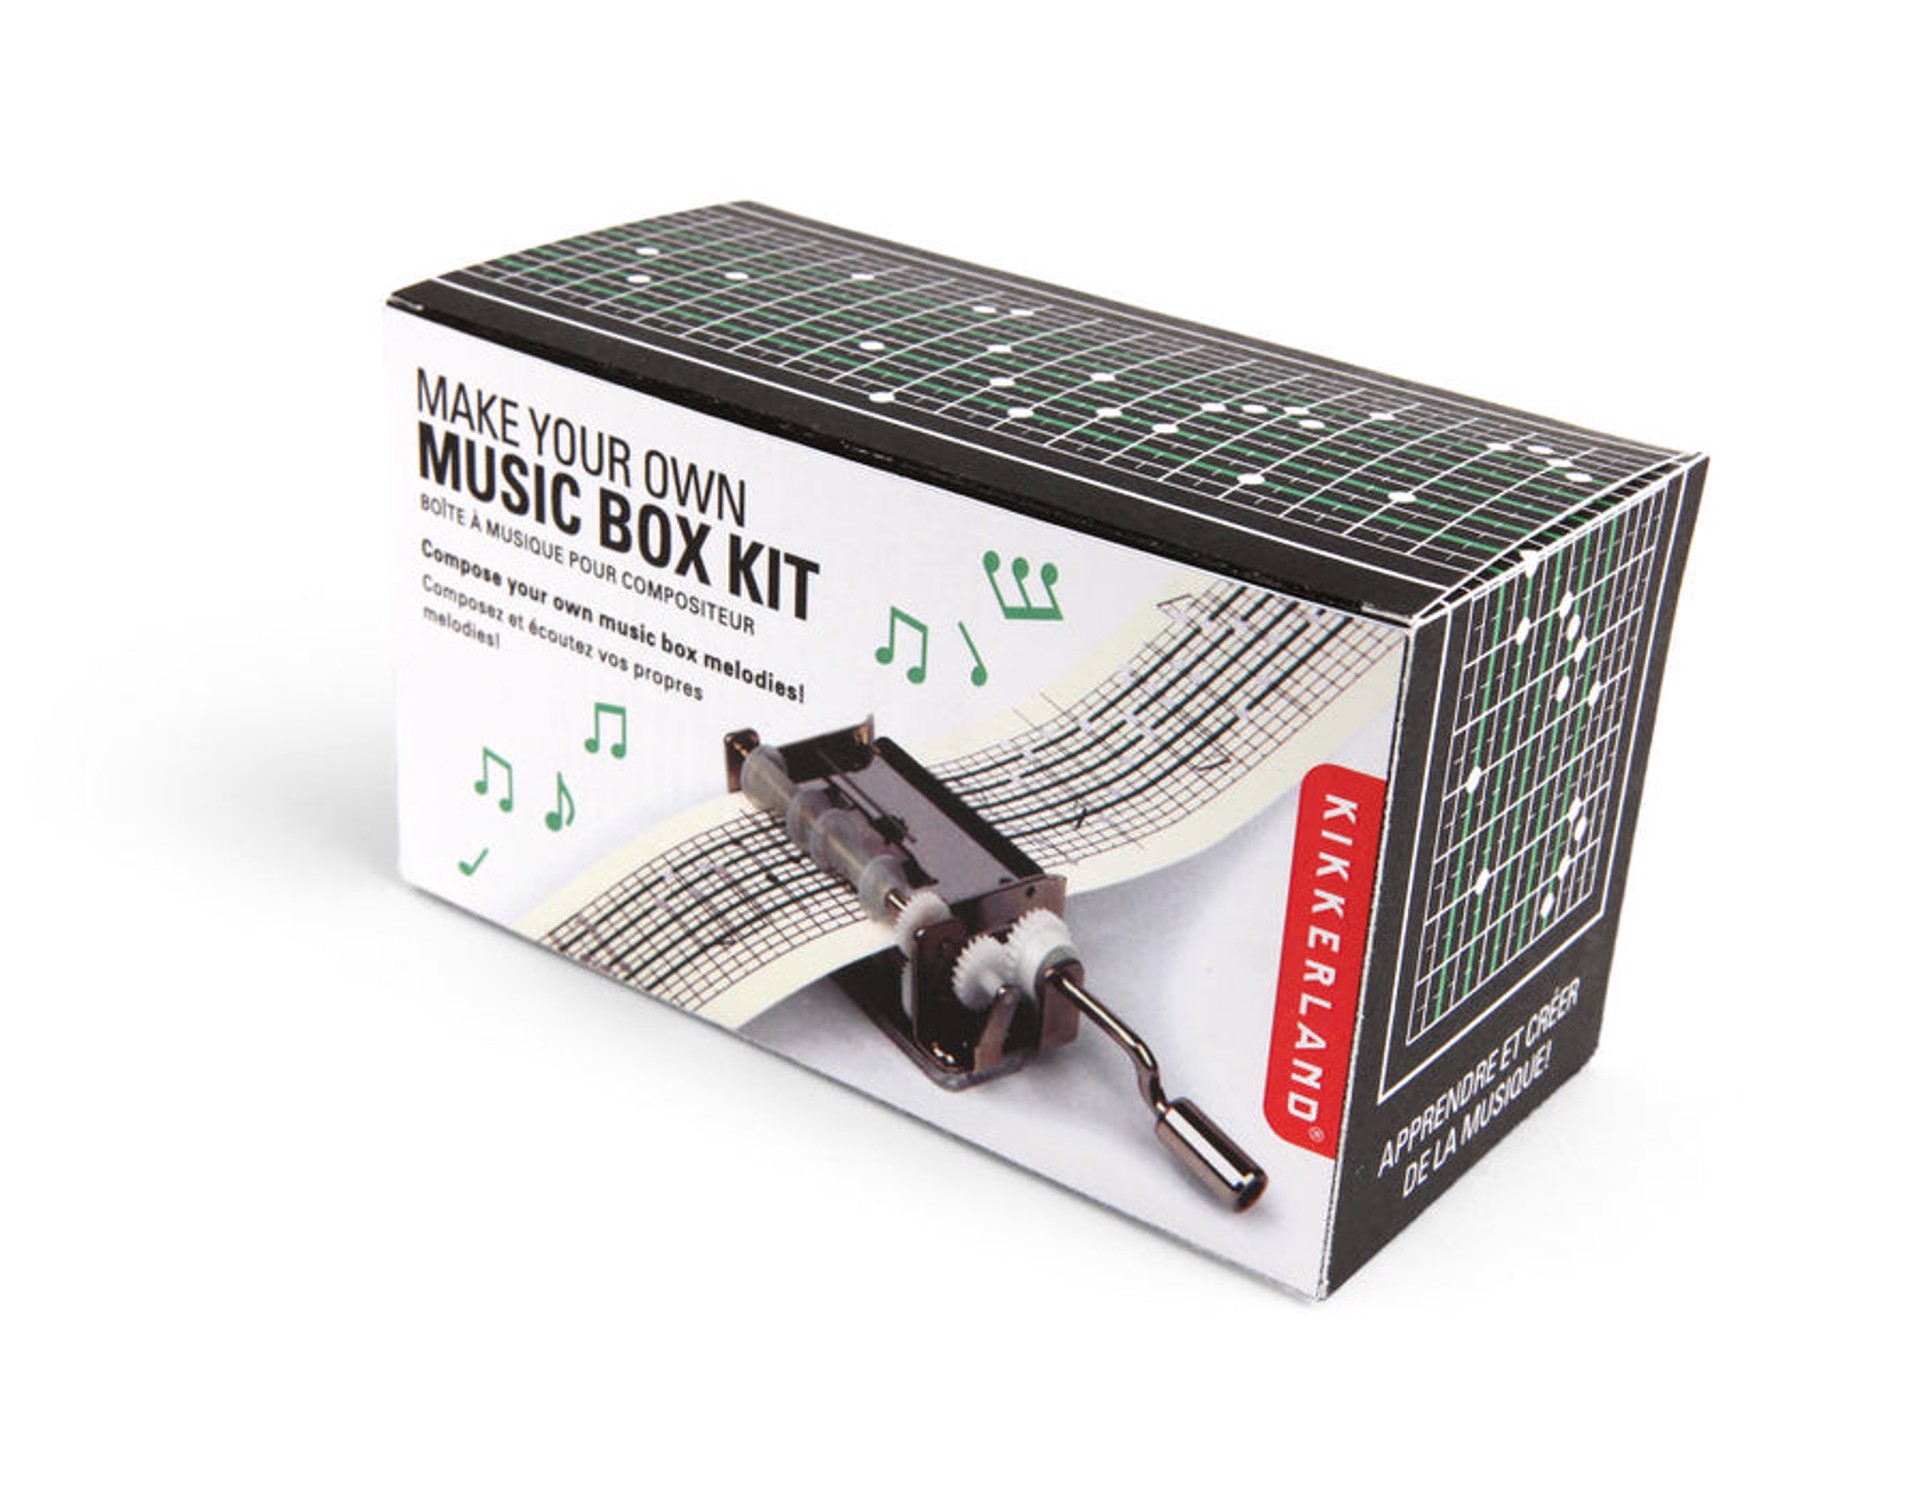 Make Your Own Music Box Kit by Chauvet Arts